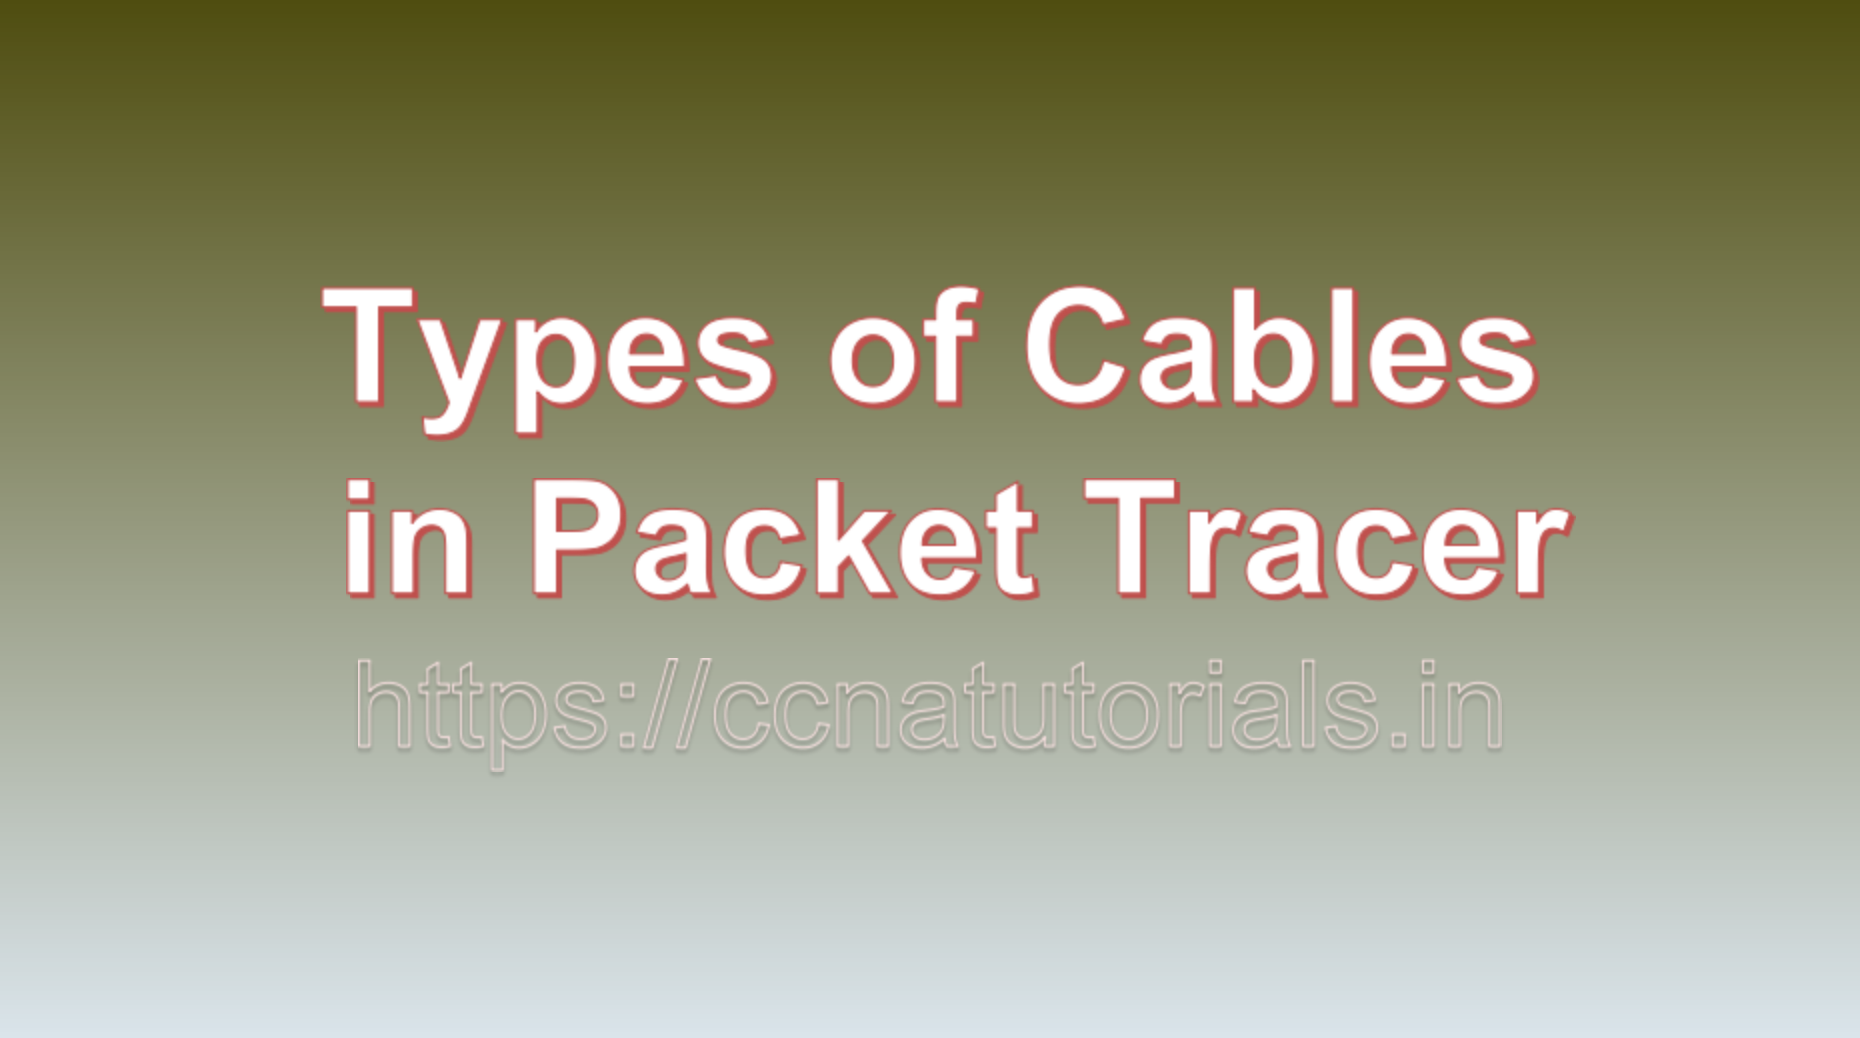 Types of Cables in Packet Tracer, ccna, ccna tutorials